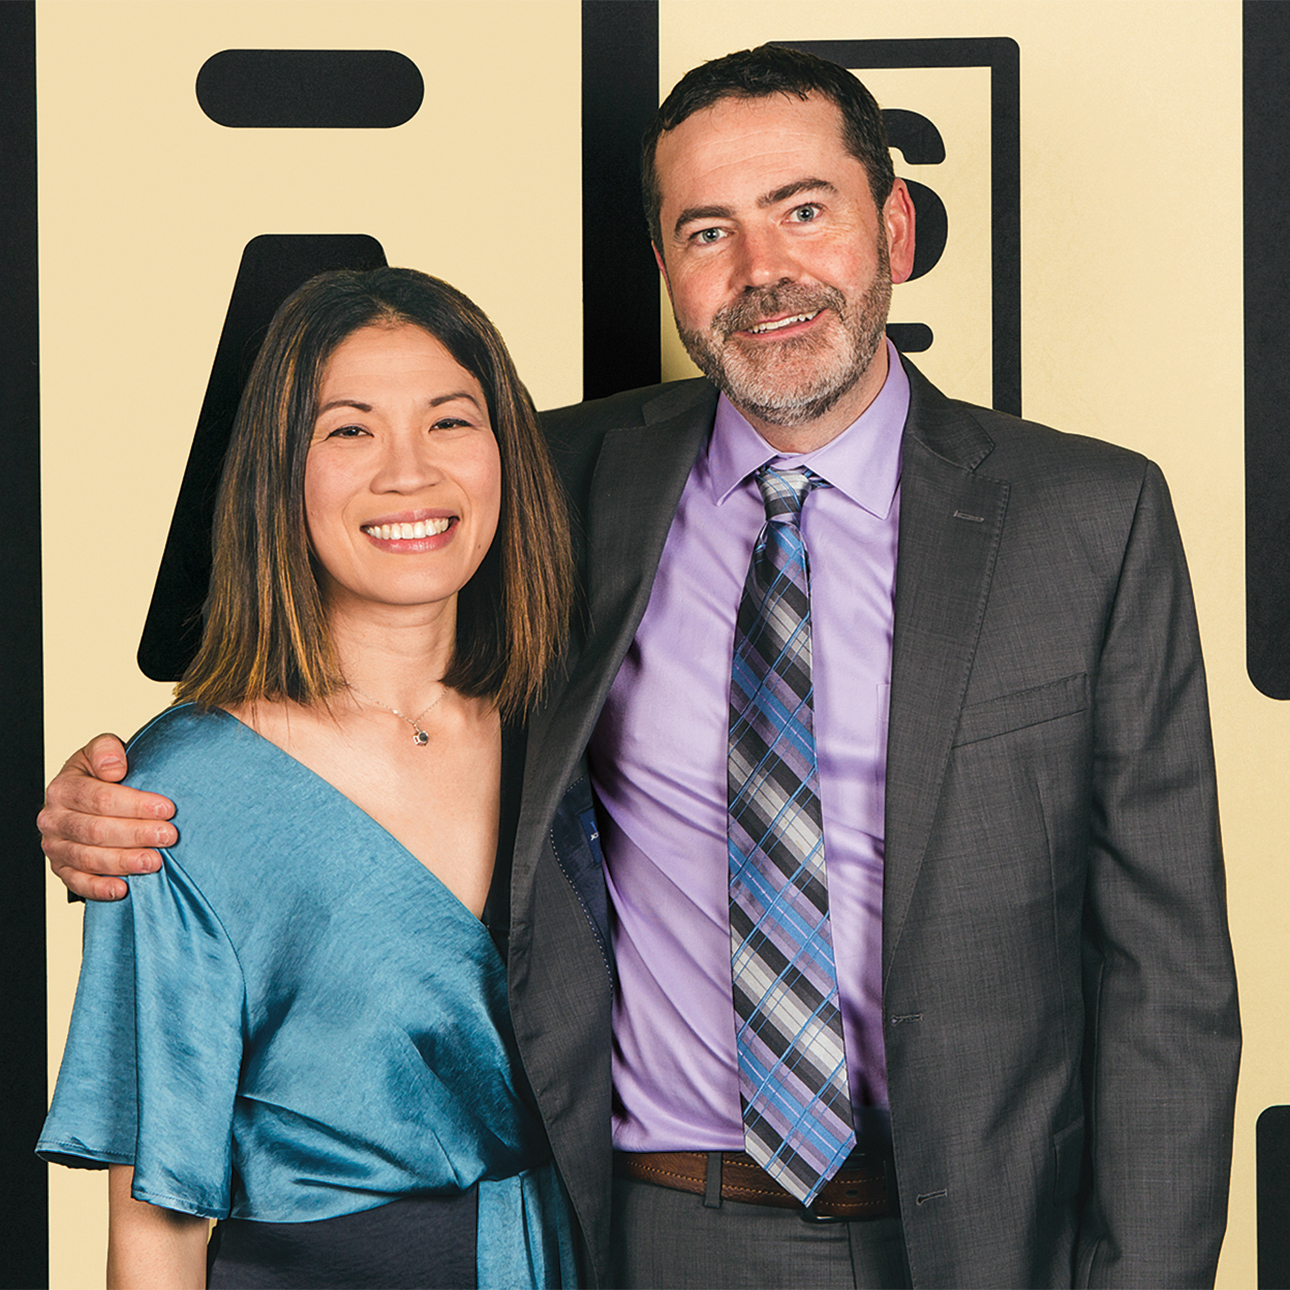 Annie Kuo and Matt Becker stand side by side with their arms around each other, smiling.